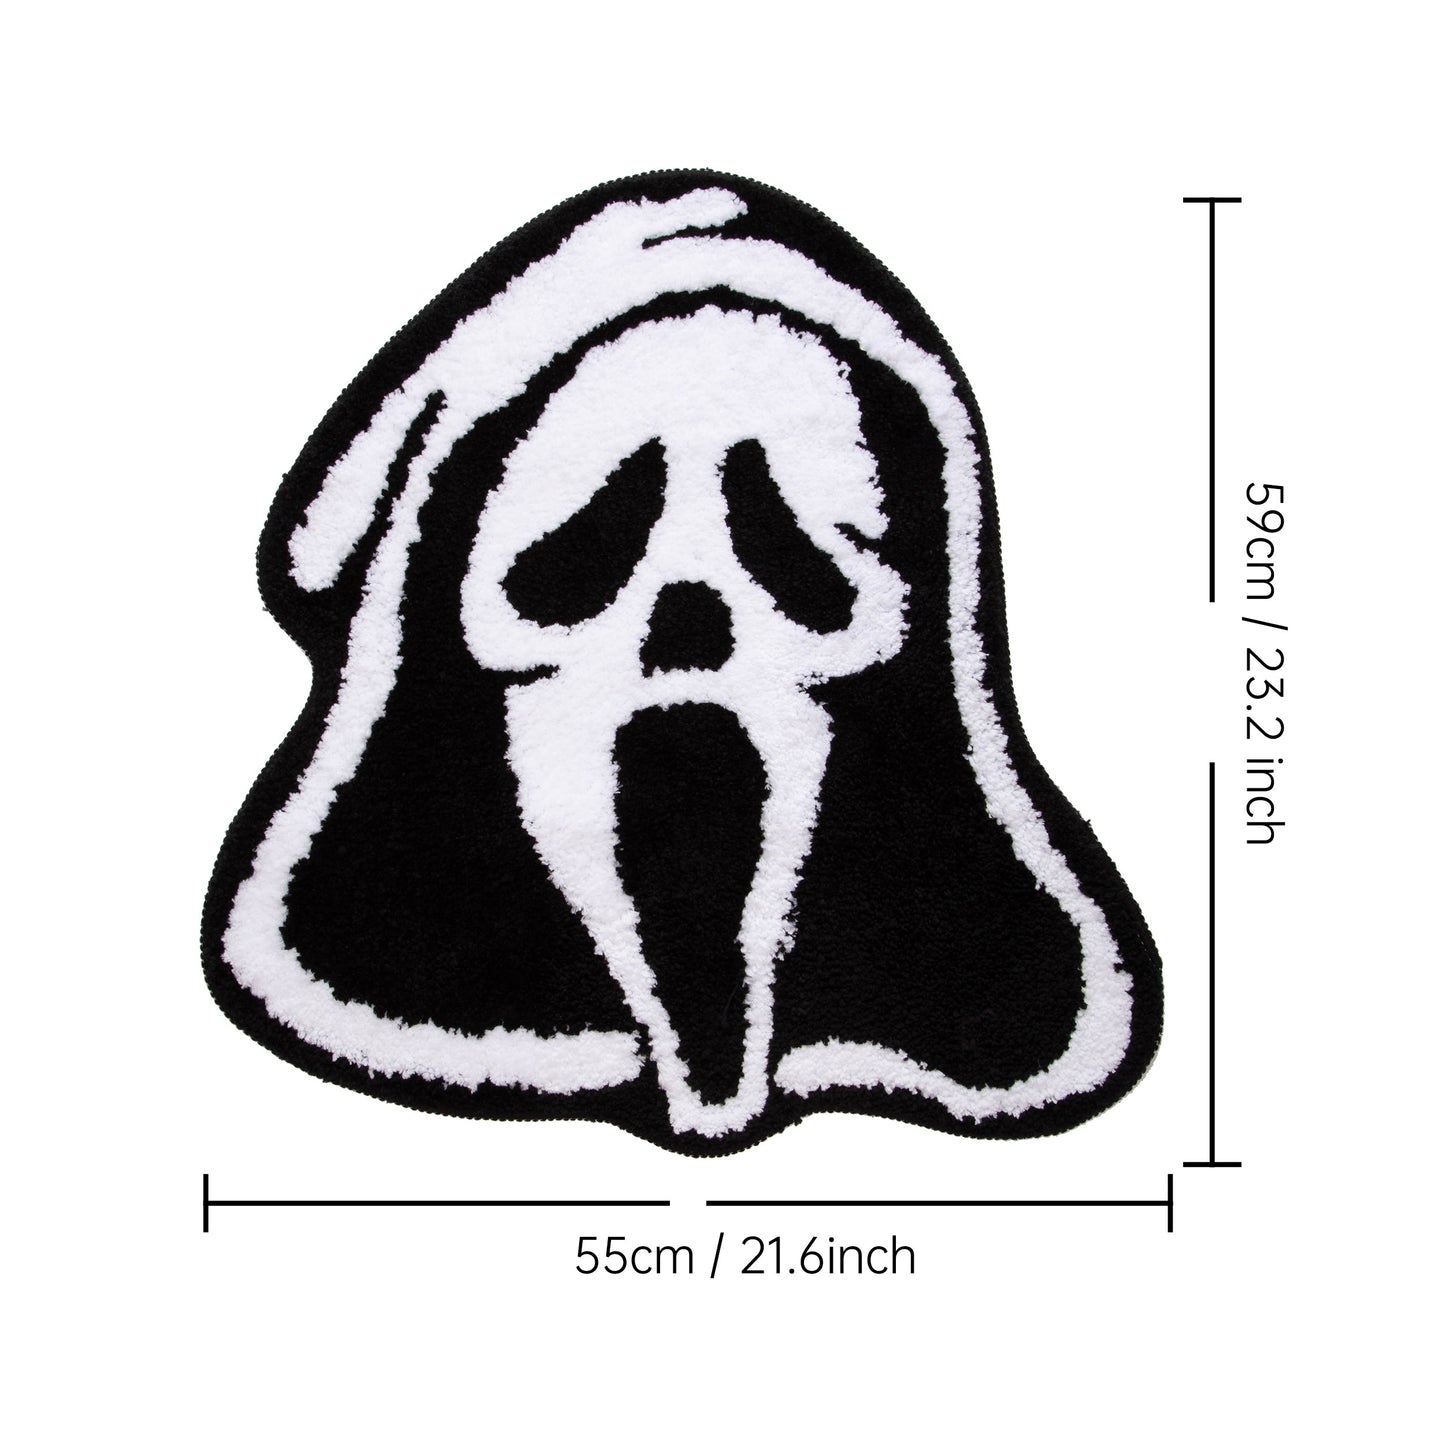 CORX Designs - Ghost Face Scream Tufted Rug - Review